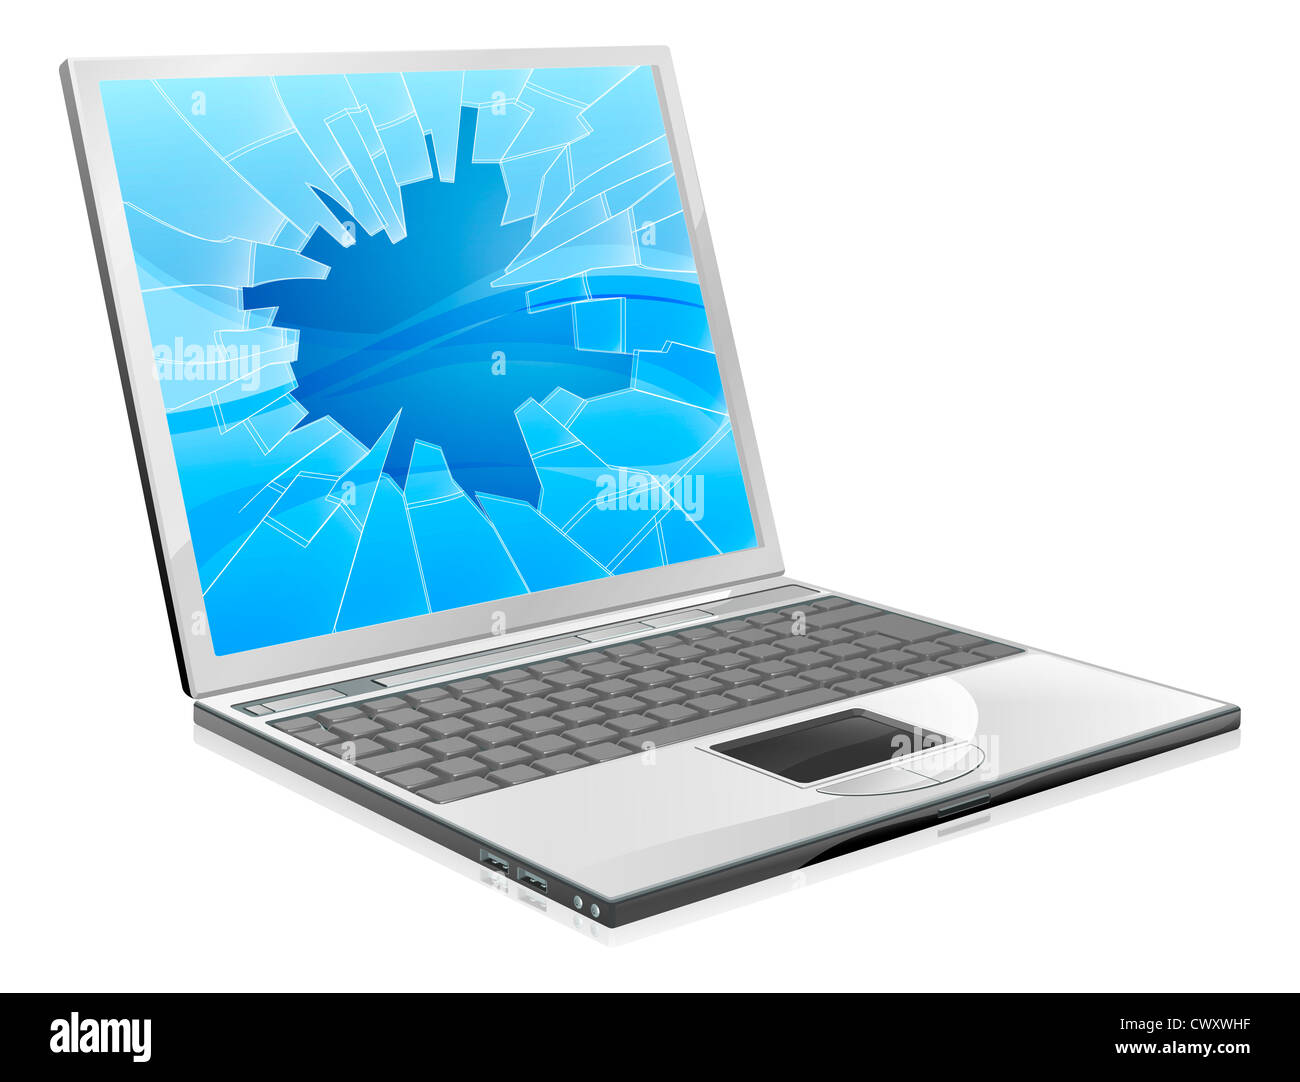 An illustration of a laptop with a smashed or broken screen Stock Photo